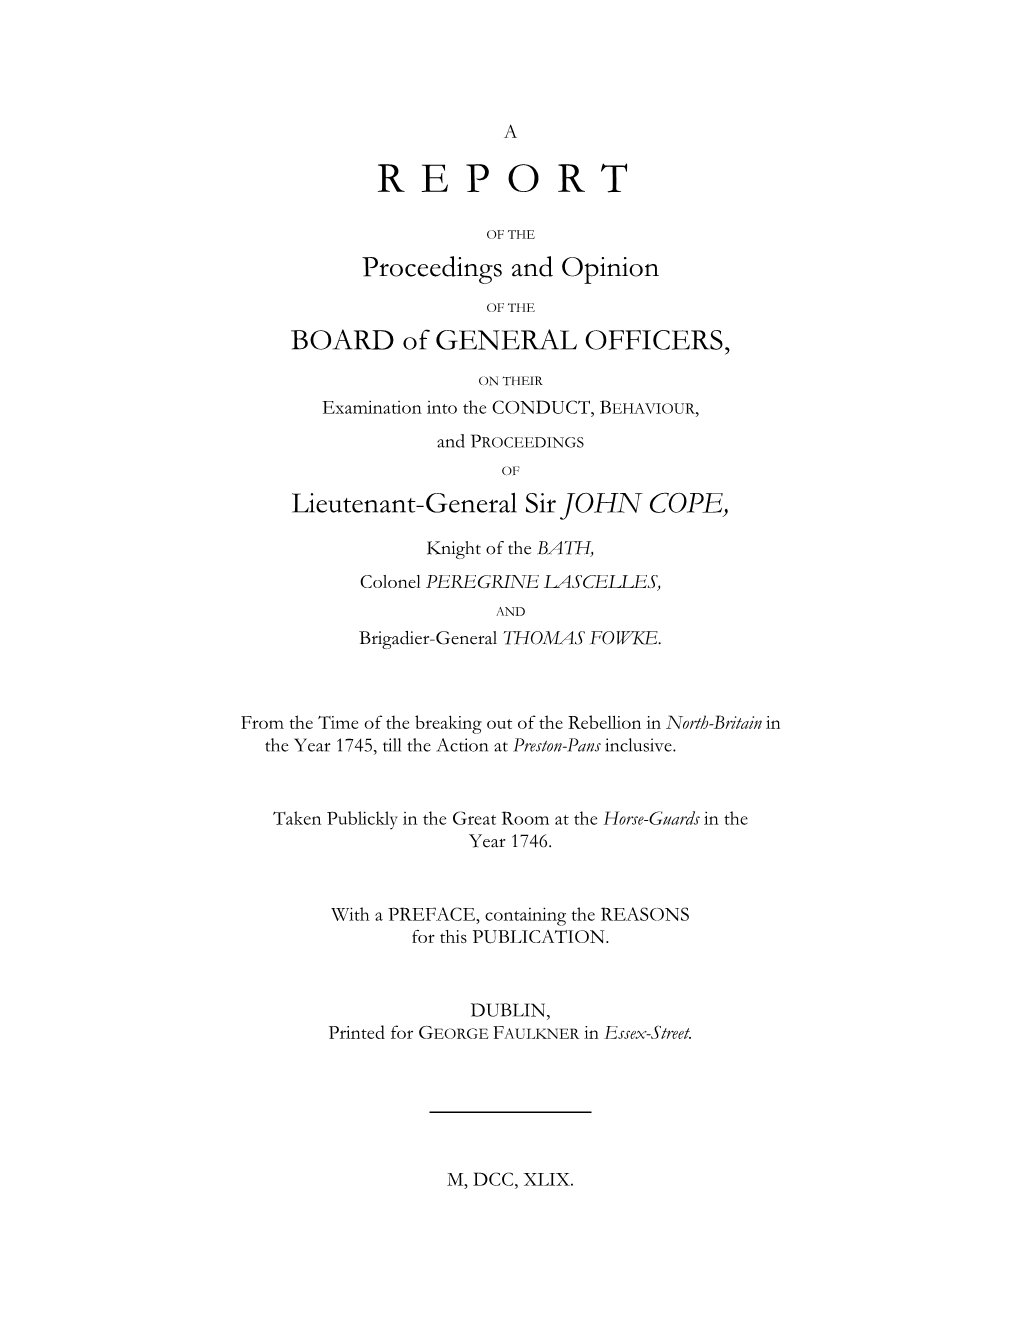 A Report of the Proceedings and Opinion of the Board of General